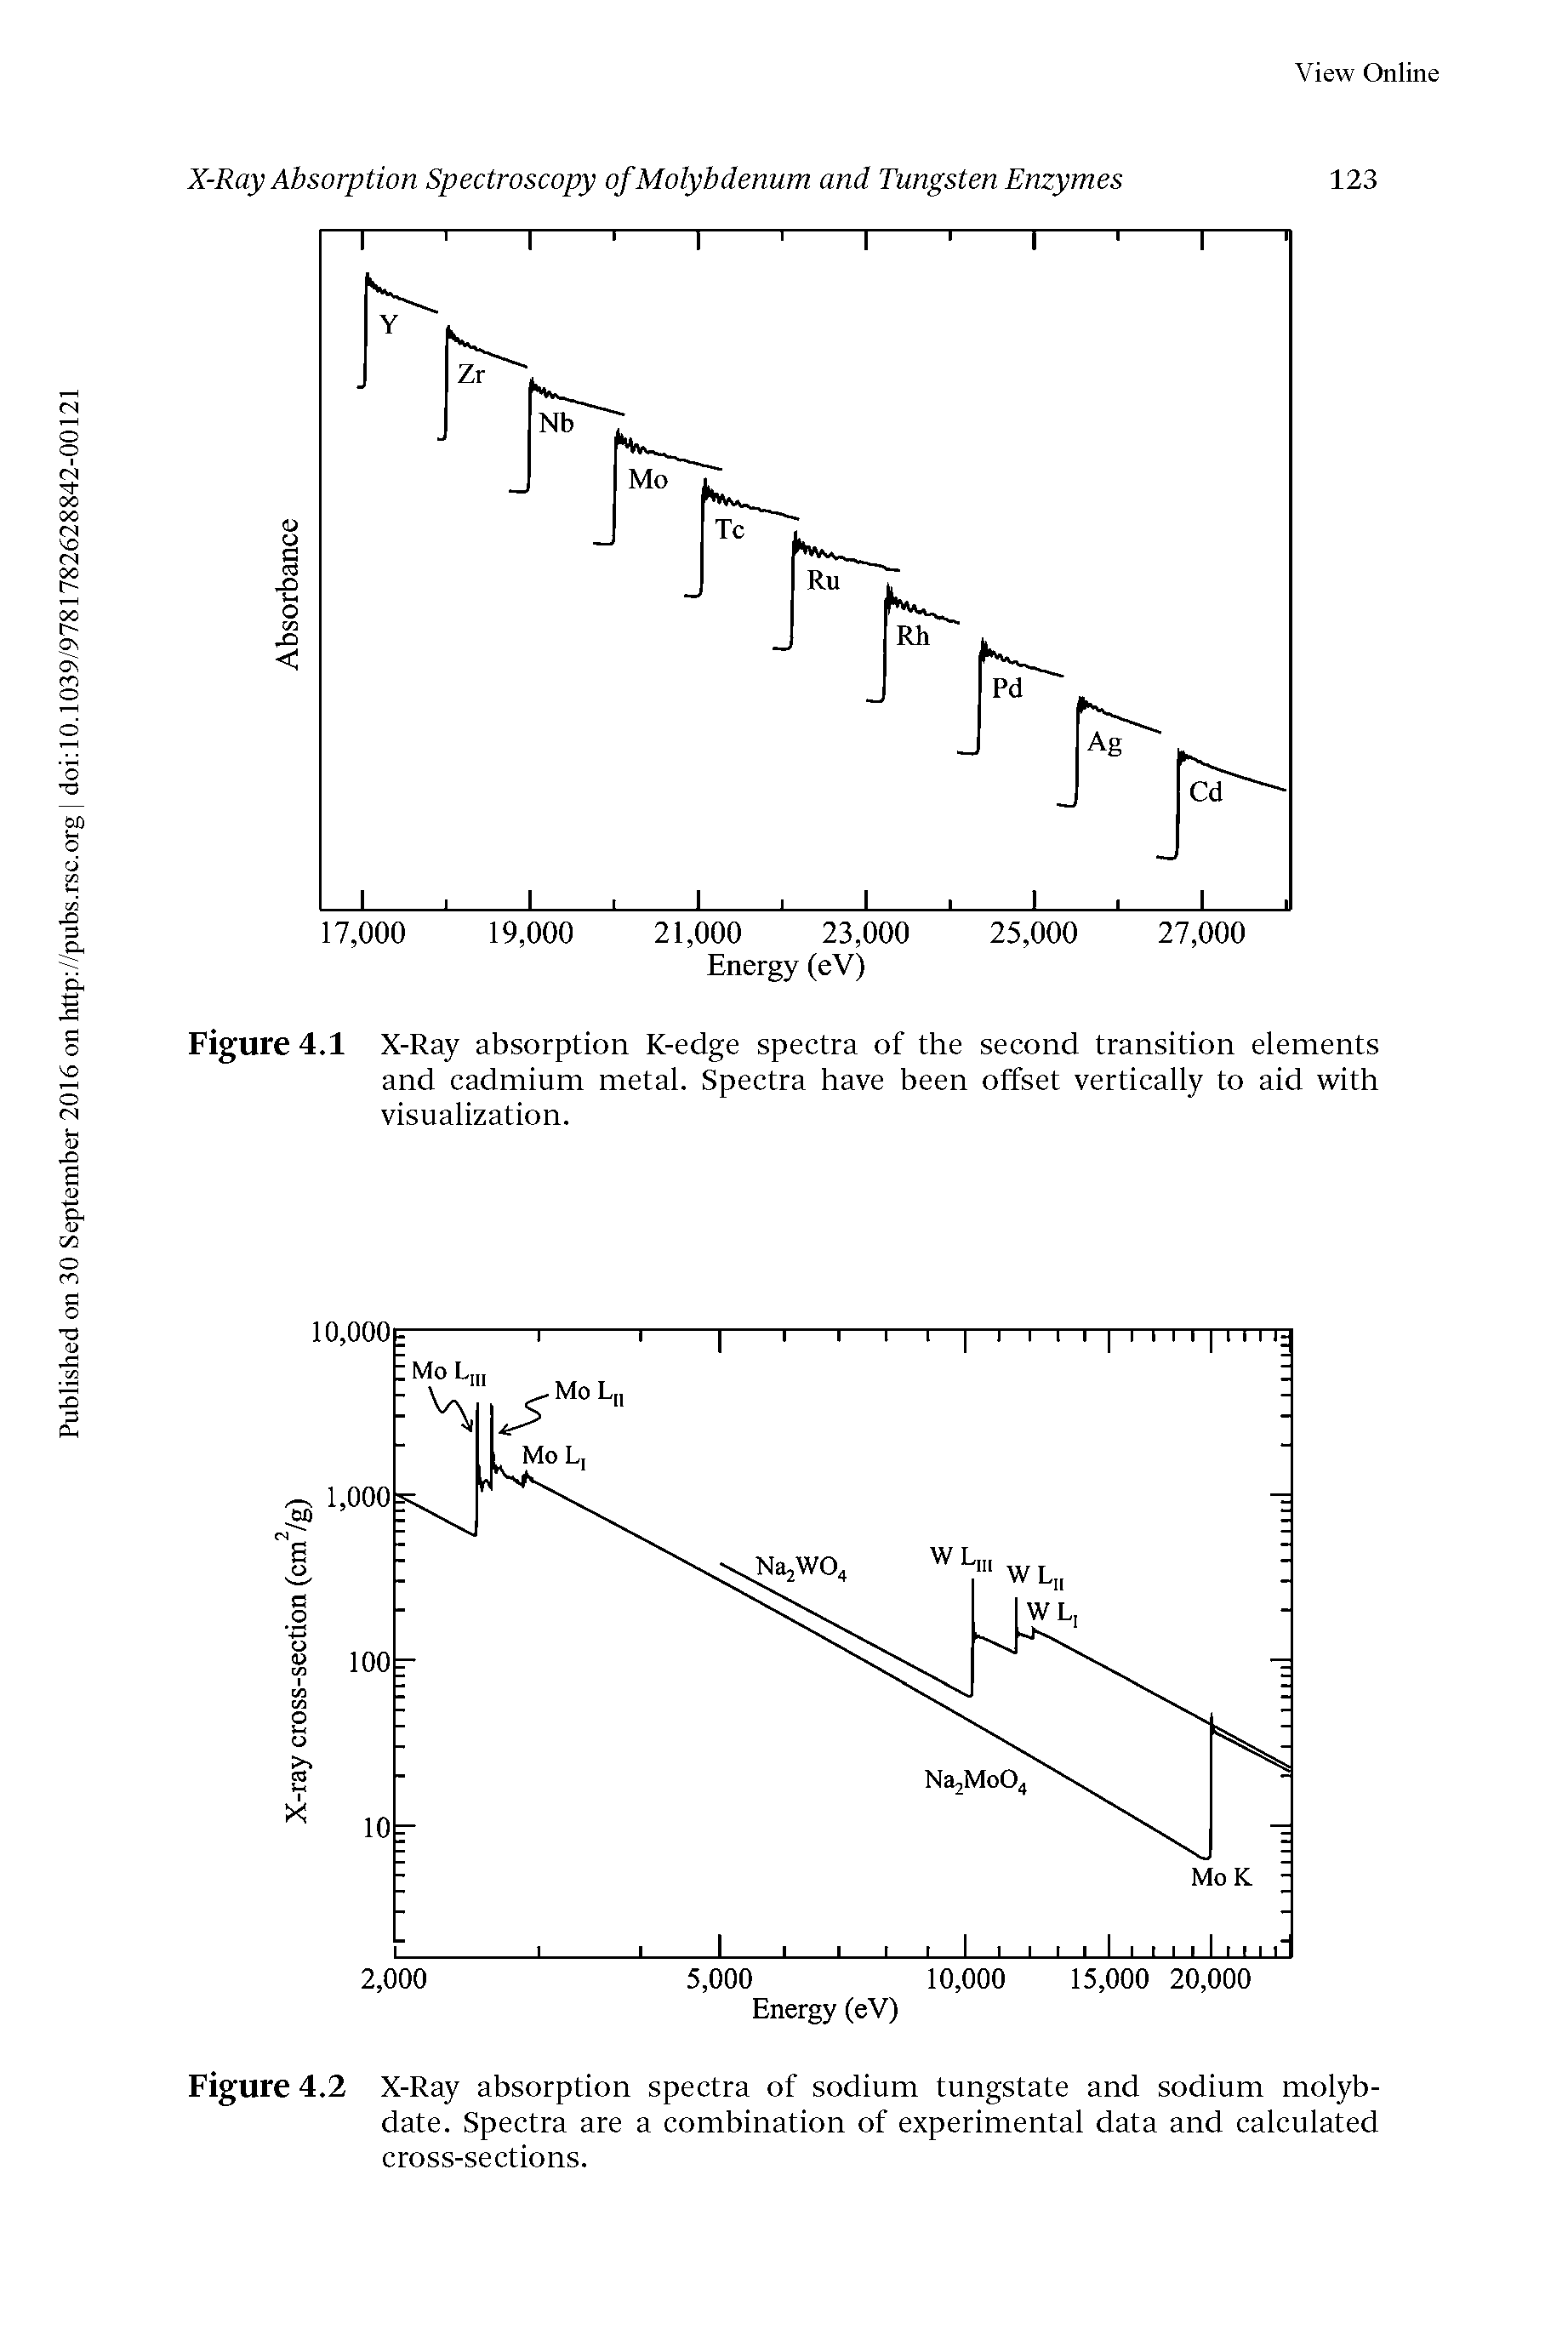 Figure 4.1 X-Ray absorption K-edge spectra of the second transition elements and cadmium metal. Spectra have been offset vertically to aid with visualization.